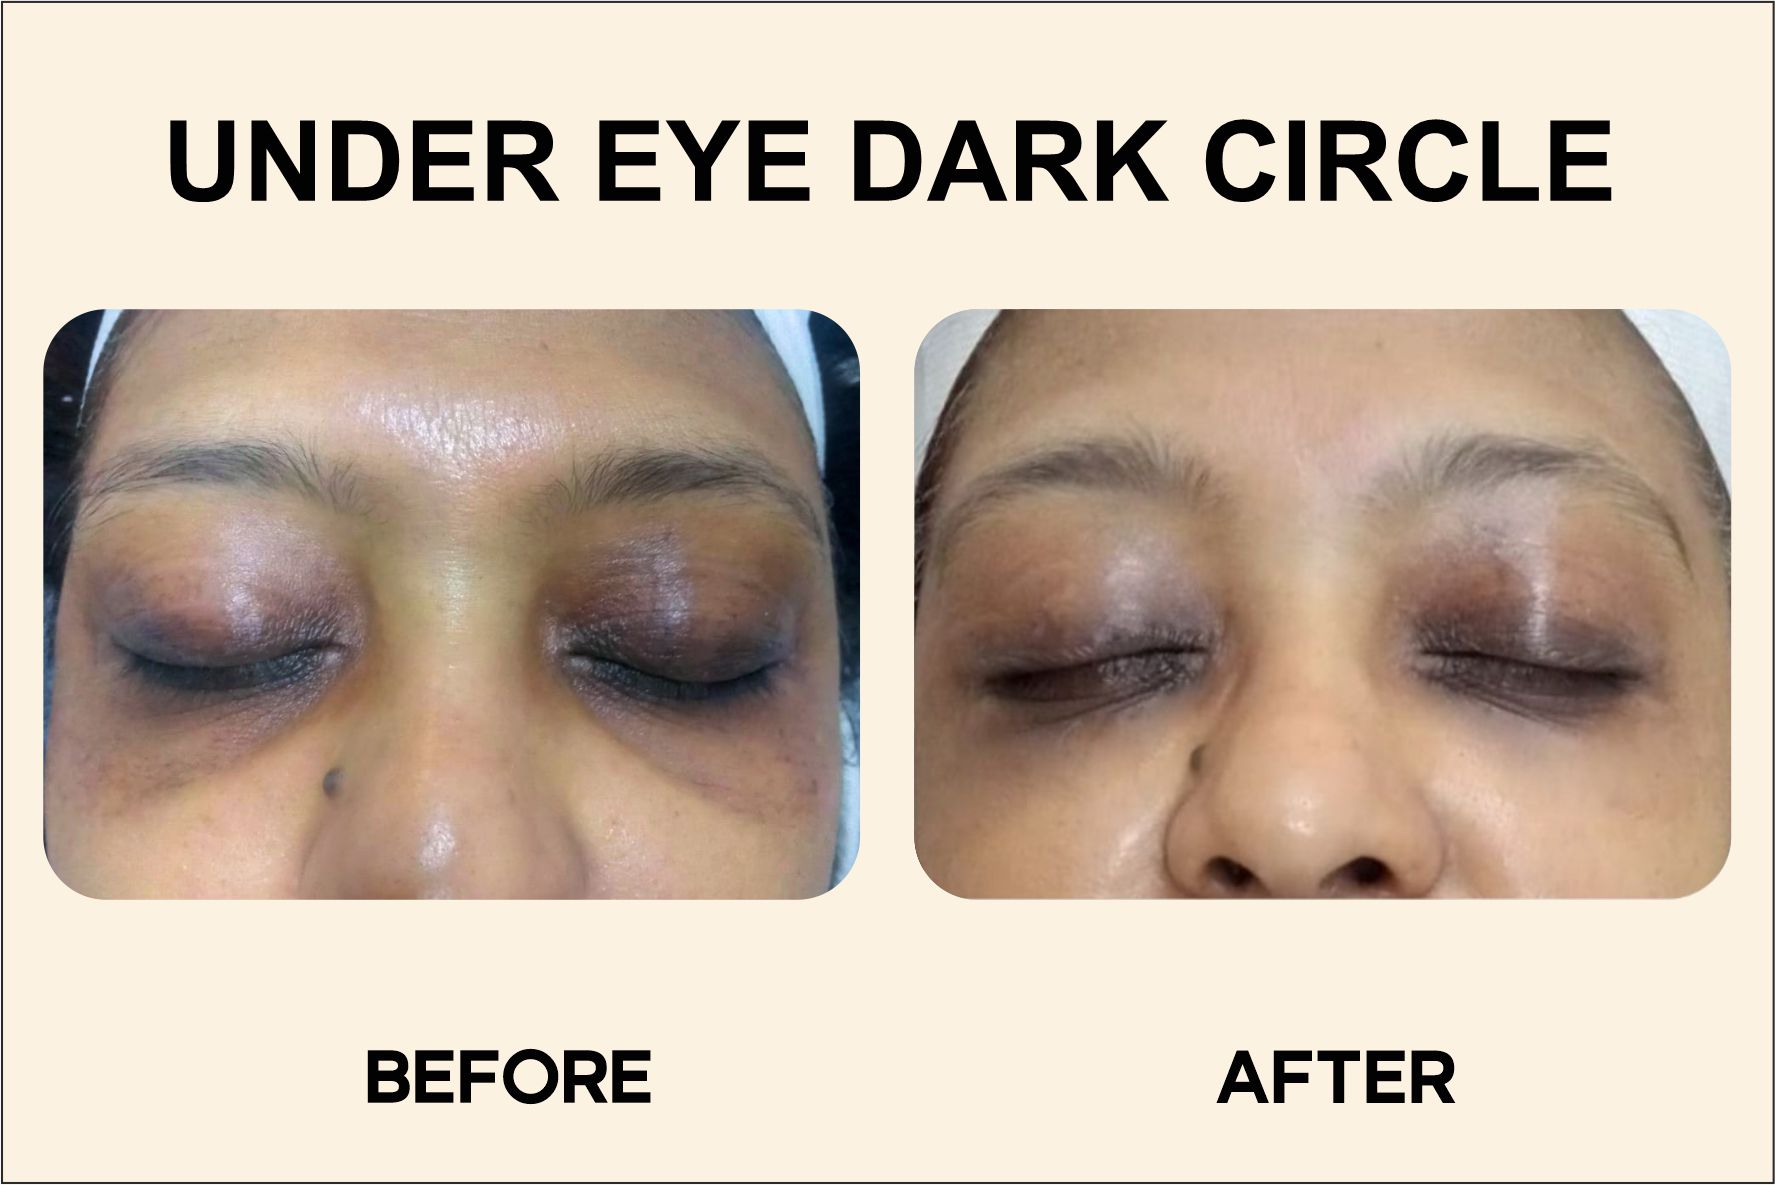 Under eye dark circle before and after images